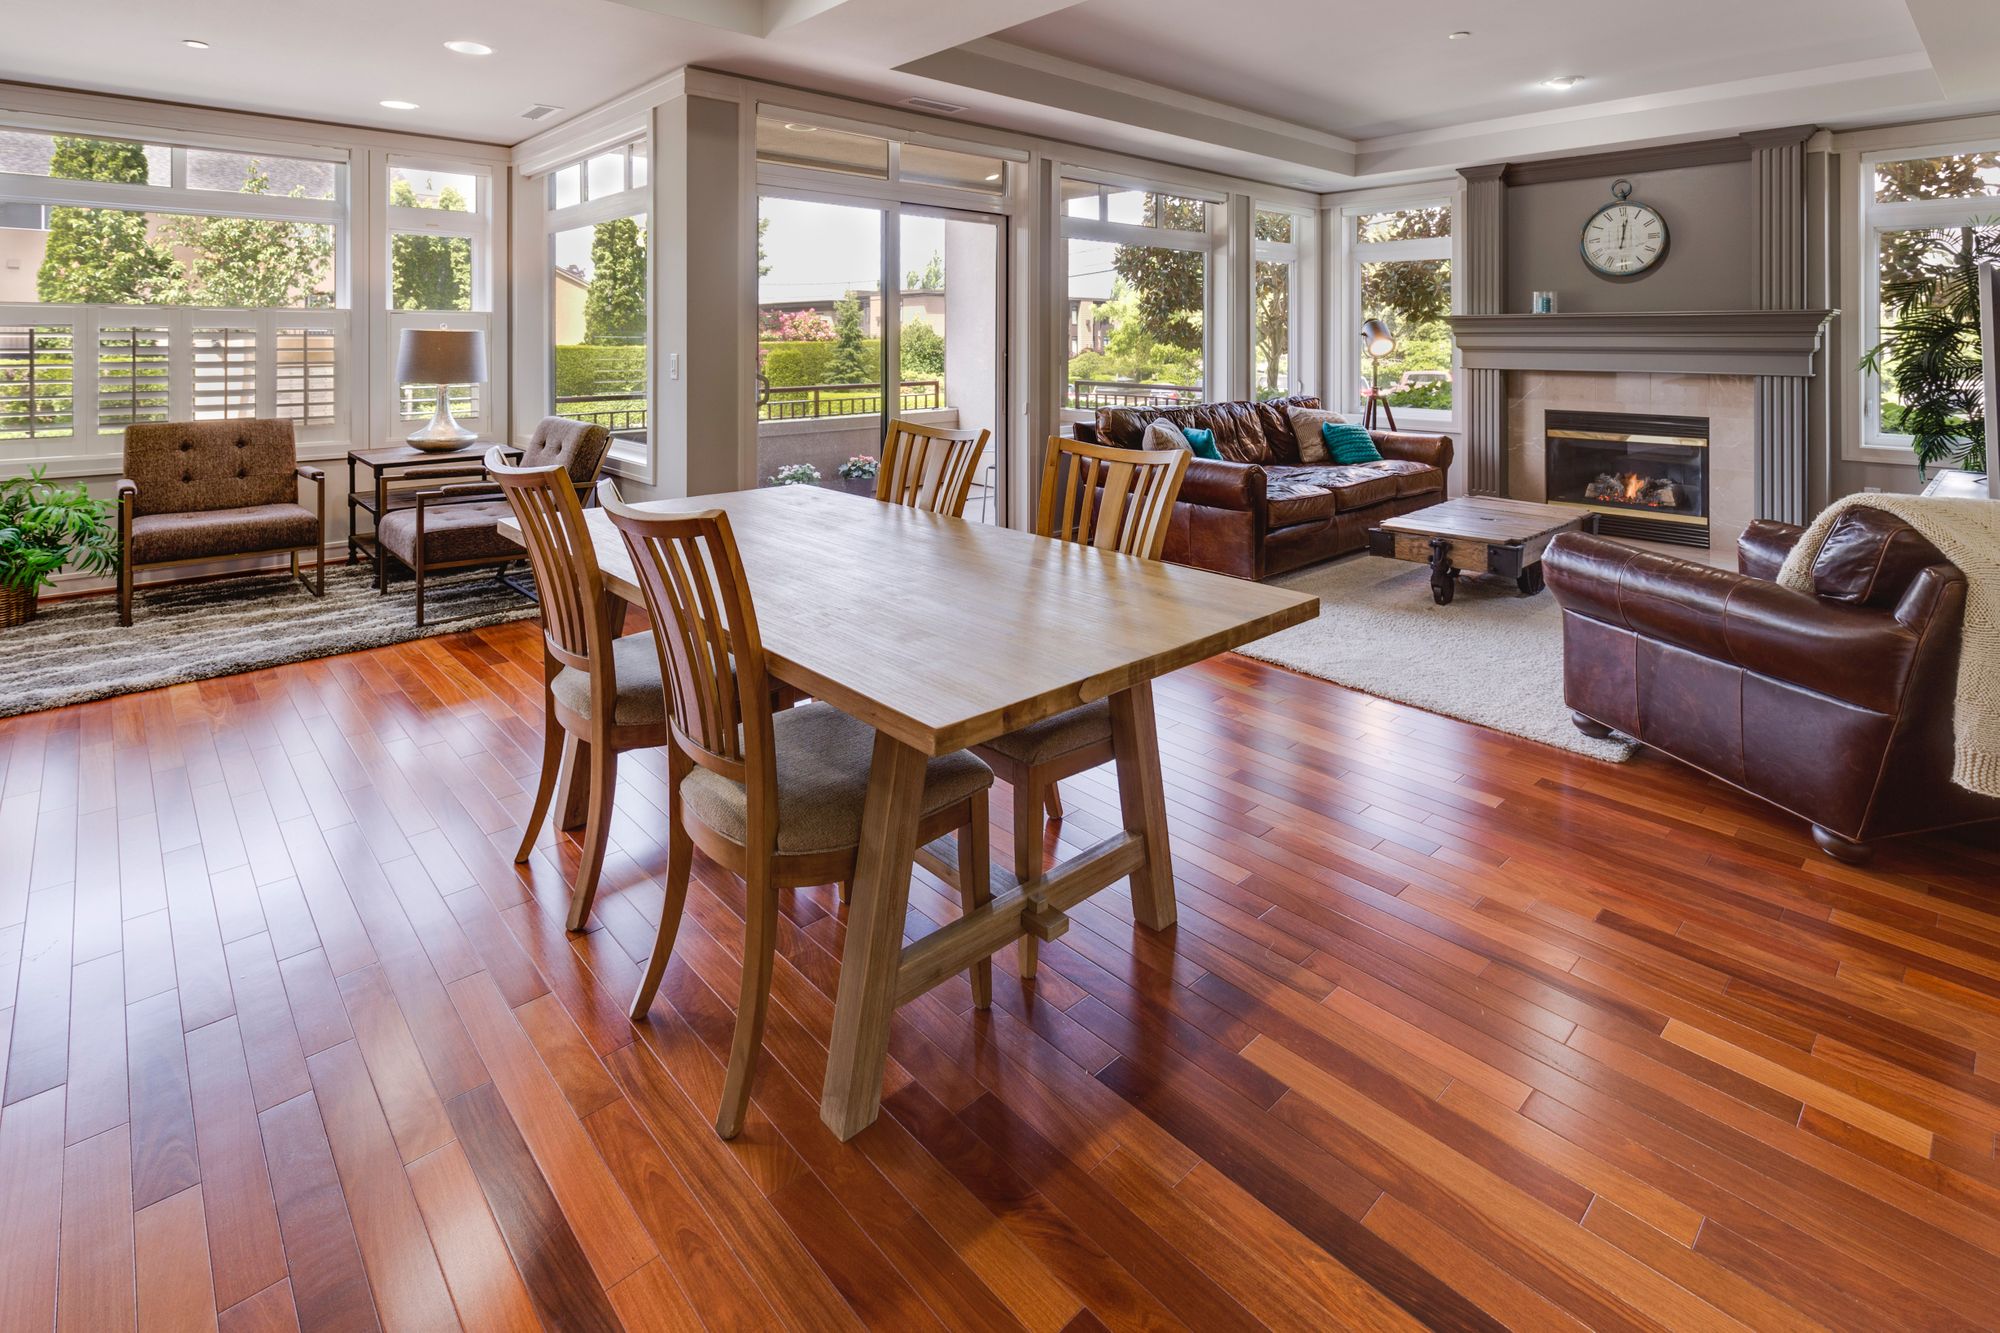 Quality Hardwood Floors Add Value To Your Home